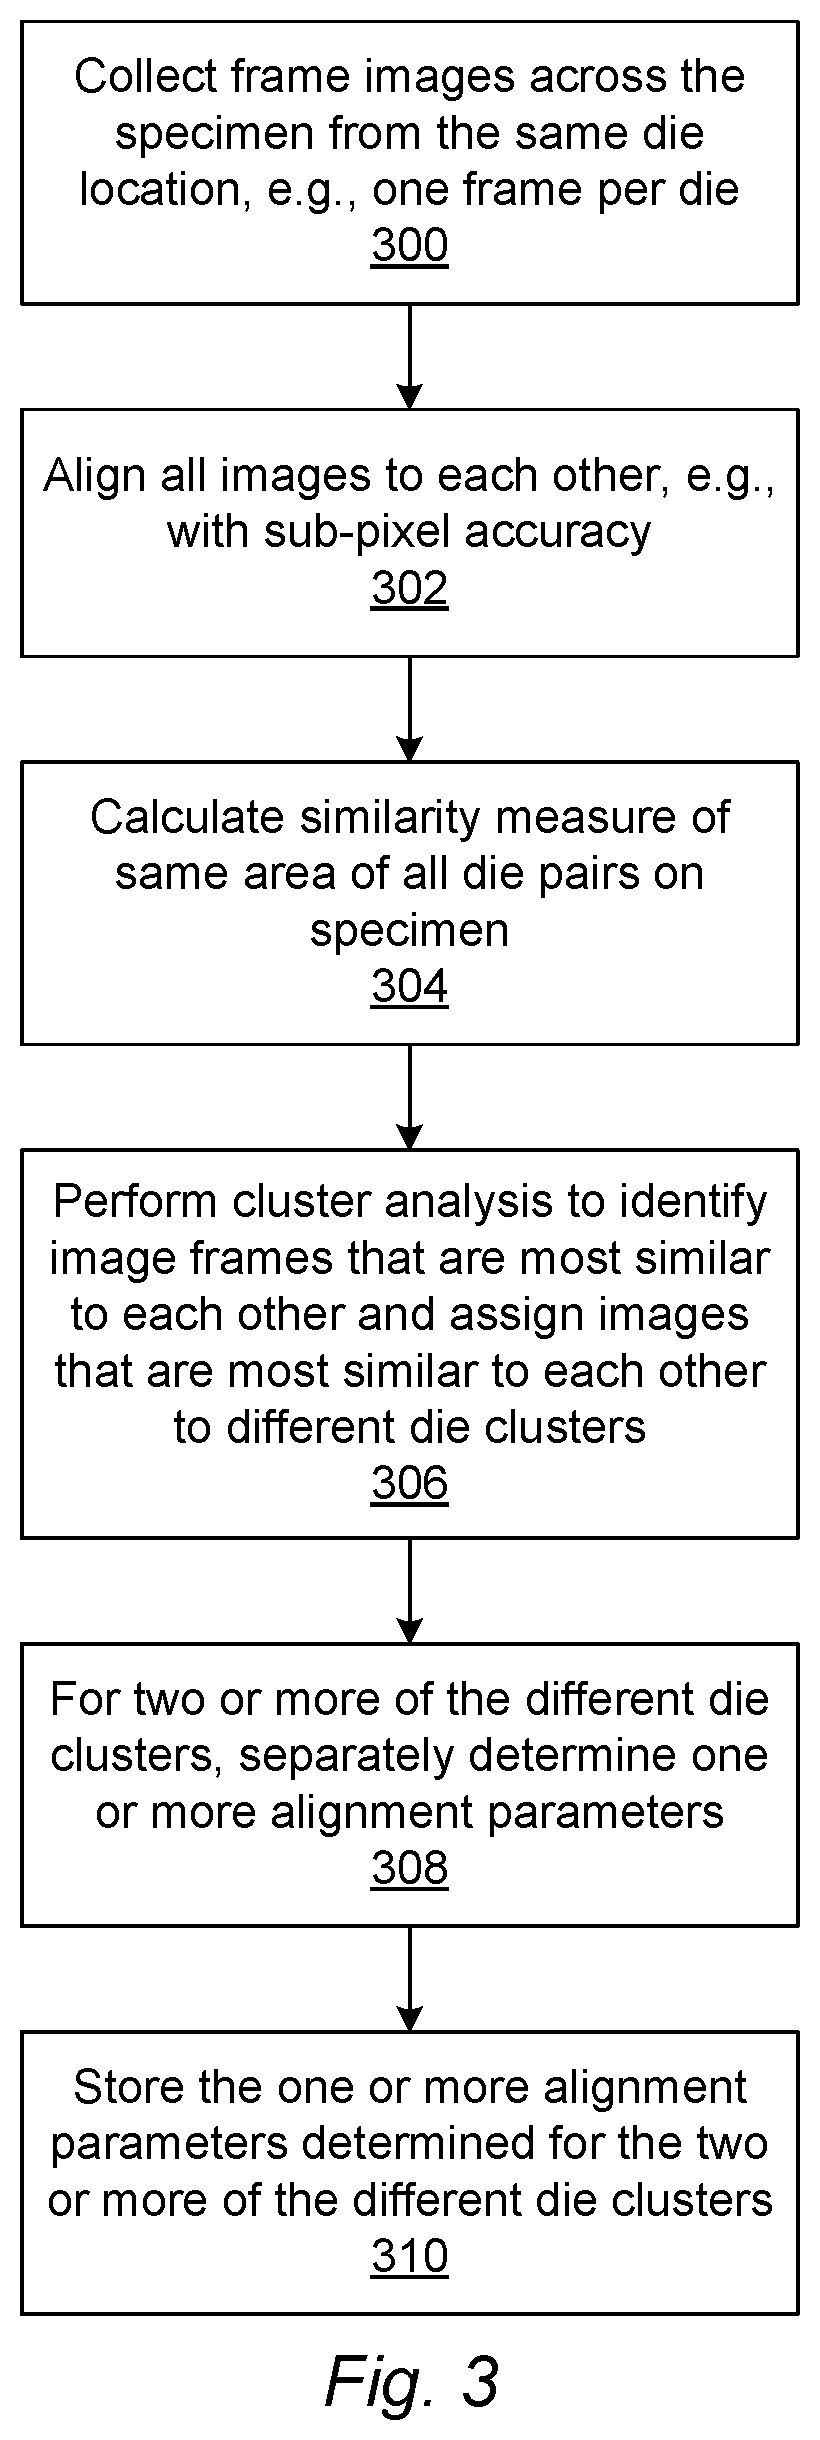 Image alignment setup for specimens with intra- and inter-specimen variations using unsupervised learning and adaptive database generation methods